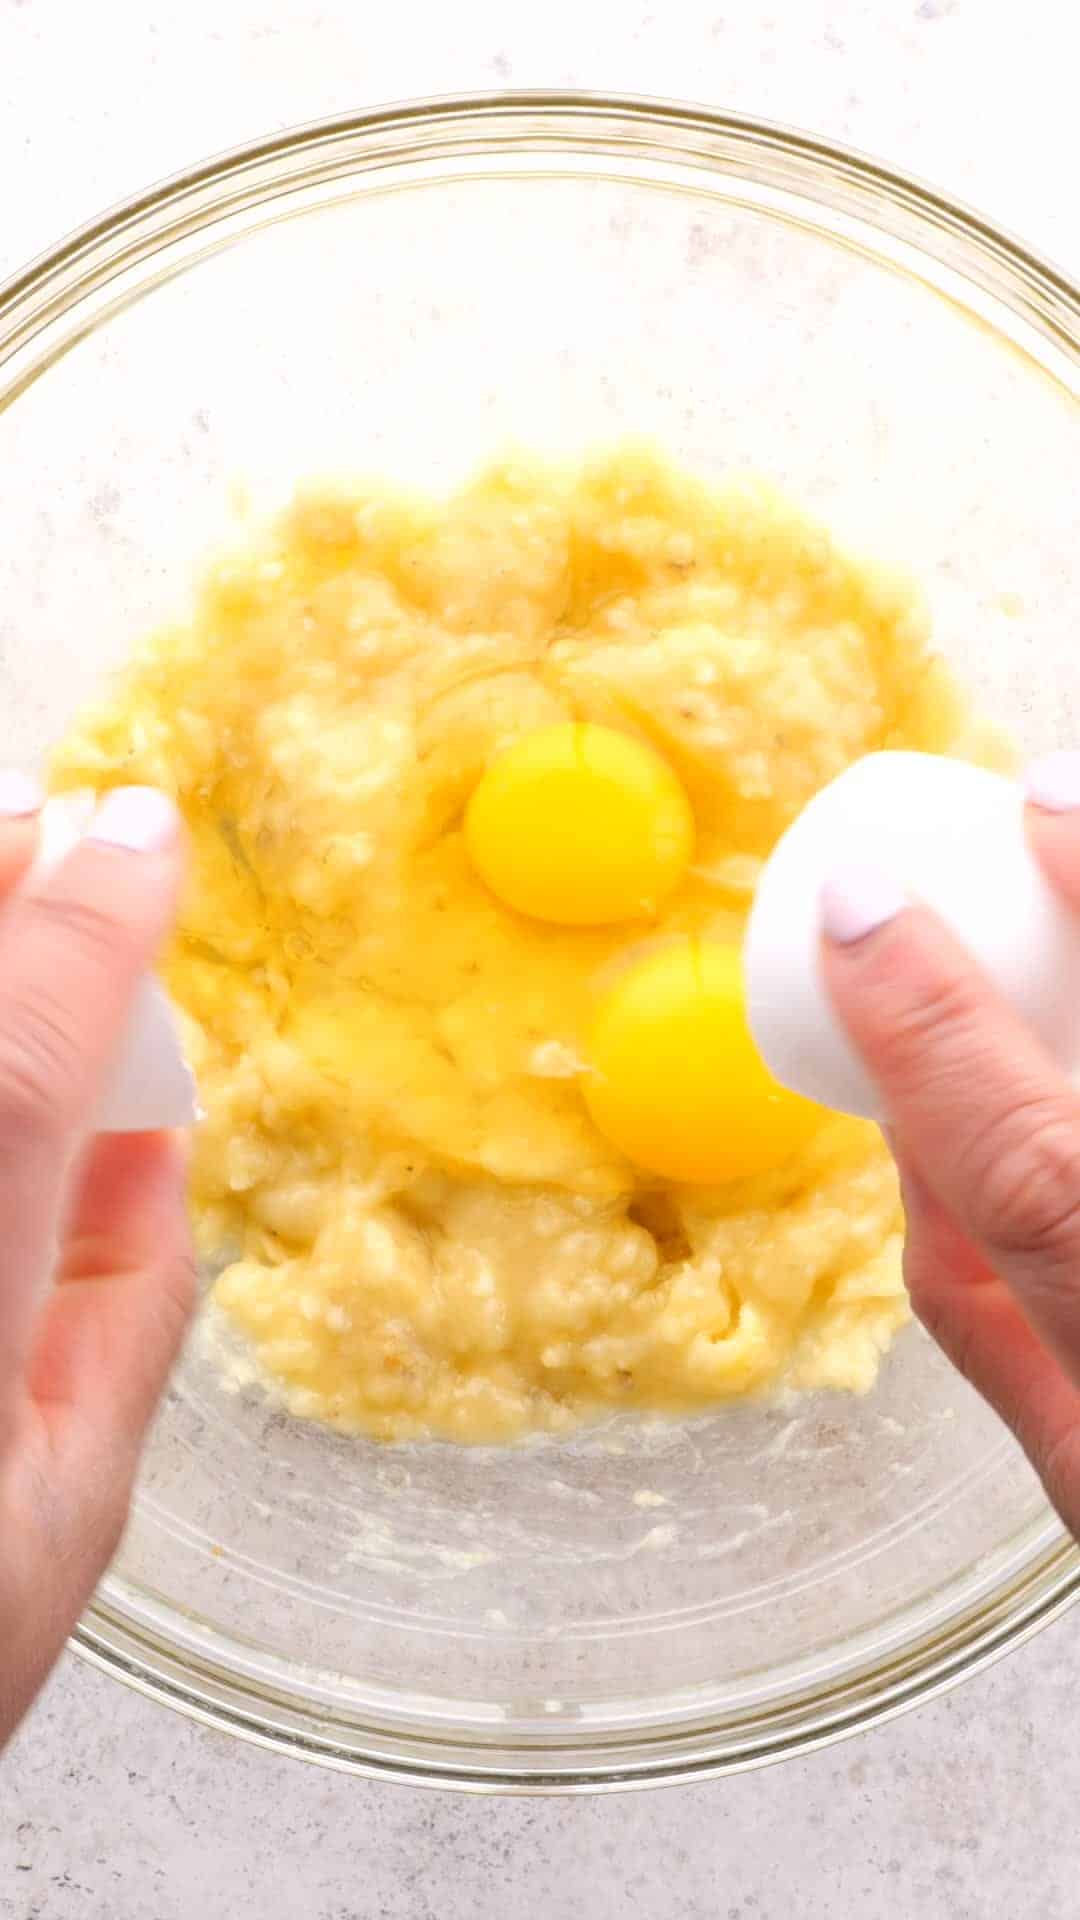 Eggs being cracked into a clear bowl of mashed bananas